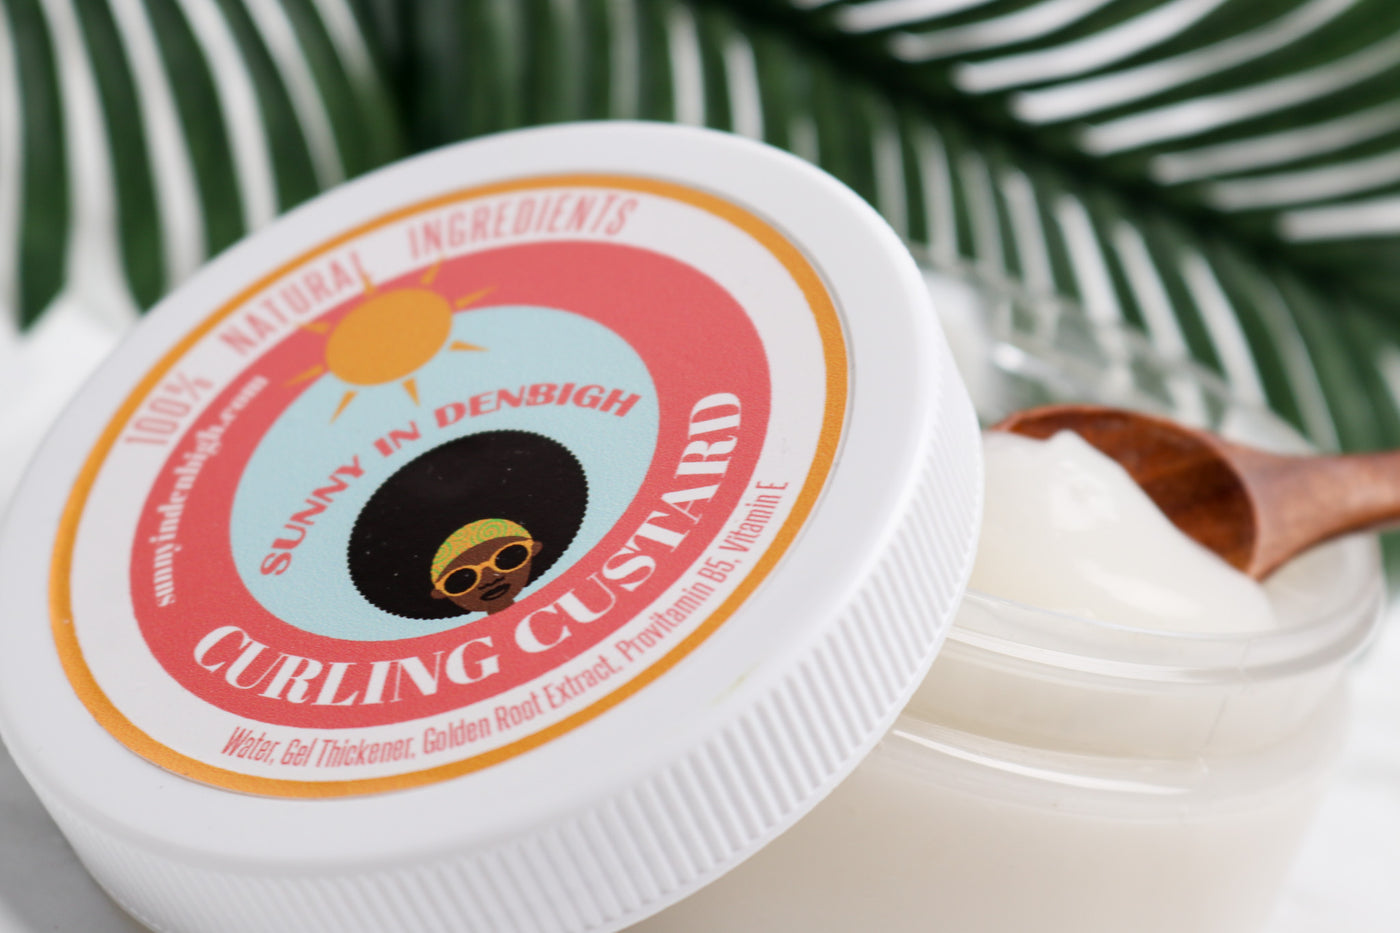 Sunny In Denbigh Curling Custard The Sunny In Denbigh Curling Custard gives moisture and curl definition, hold and brilliant shiny hair! Utilizing the humectant properties of Shea Butter, Olive Oil, Gel Thickener, and Vitamin E, our Curling Custard will give weight to your hair, define your curls, remove frizz, provide long-lasting hold and shine without ever being greasy, crunchy or drying.